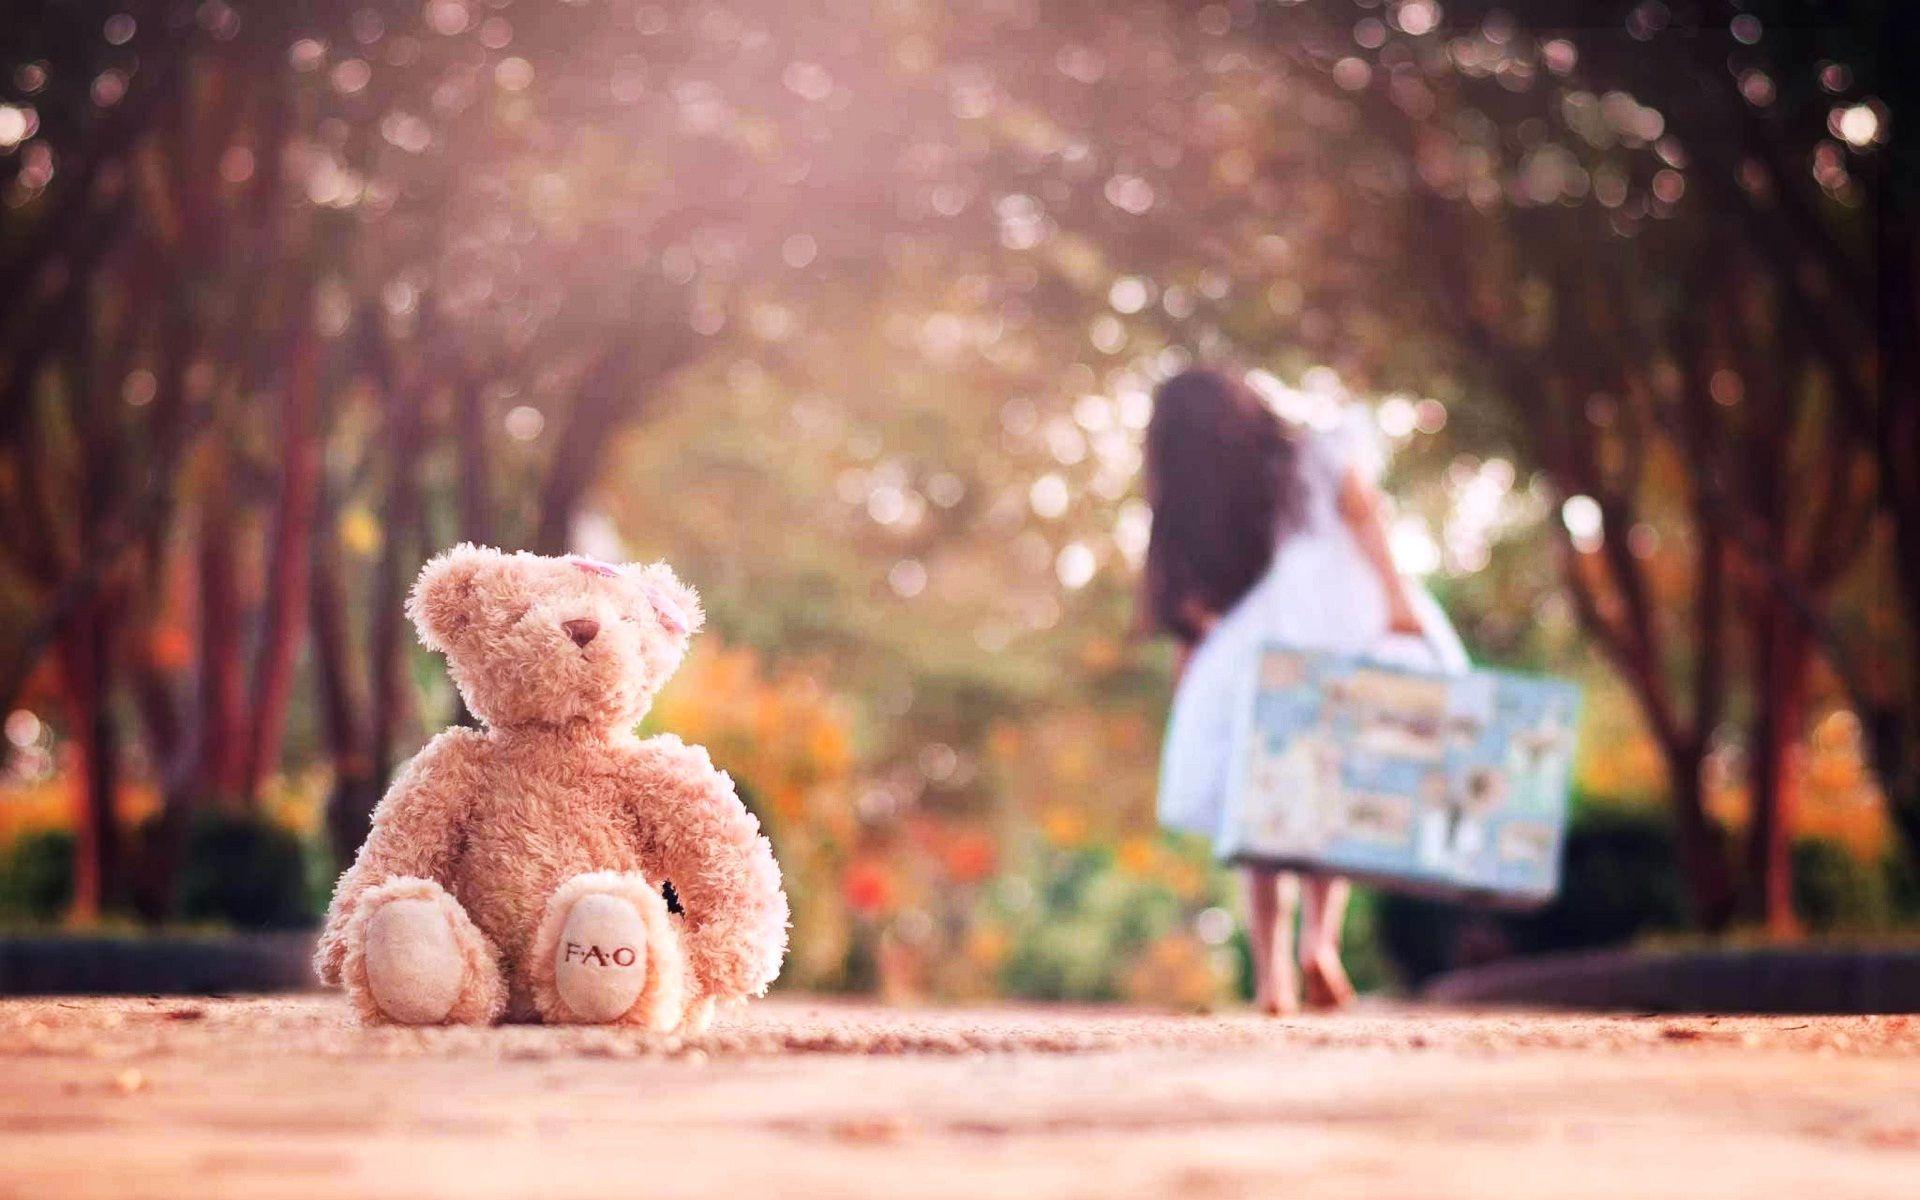 I miss you so much lonely teddy HD wallpaperNew HD wallpaper